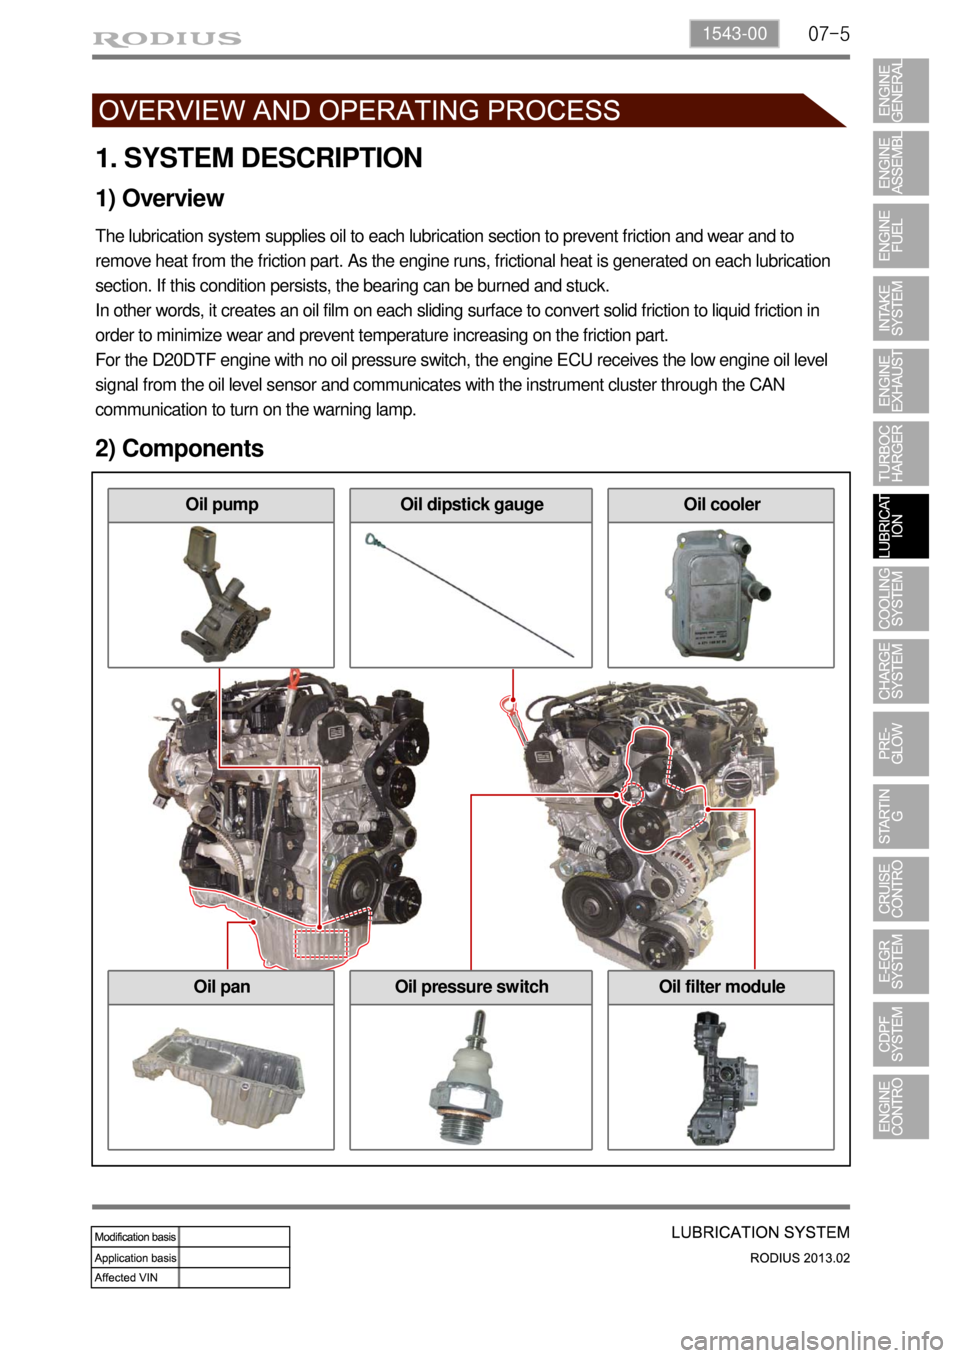 SSANGYONG TURISMO 2013  Service Manual 07-51543-00
1. SYSTEM DESCRIPTION
1) Overview
The lubrication system supplies oil to each lubrication section to prevent friction and wear and to 
remove heat from the friction part. As the engine run